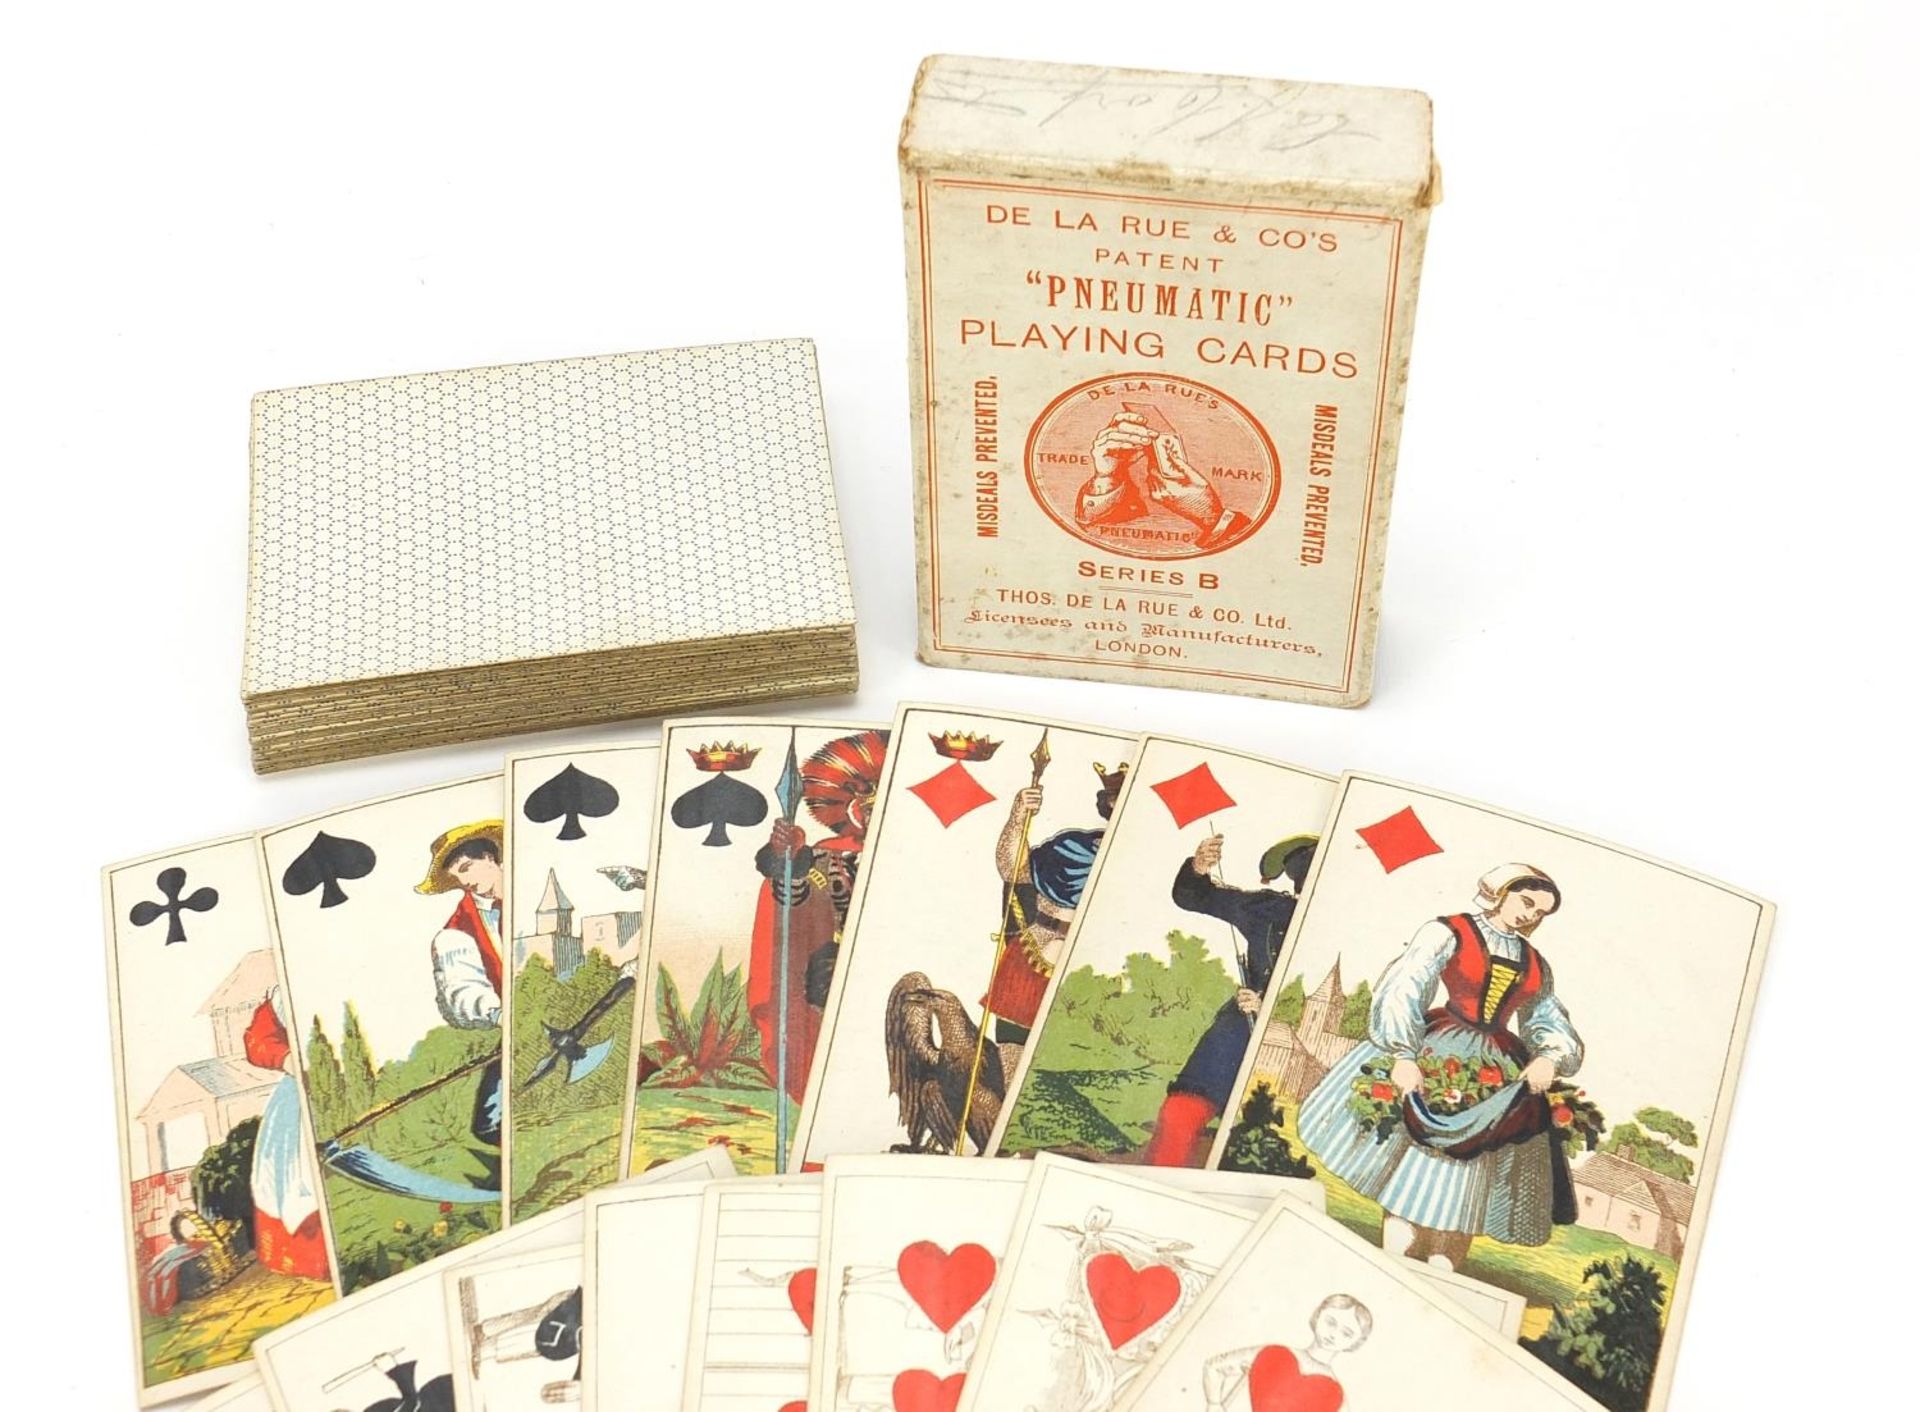 Antique Pneumatic fortune telling playing cards, De La Rue and Co's series B : For Further Condition - Image 2 of 3